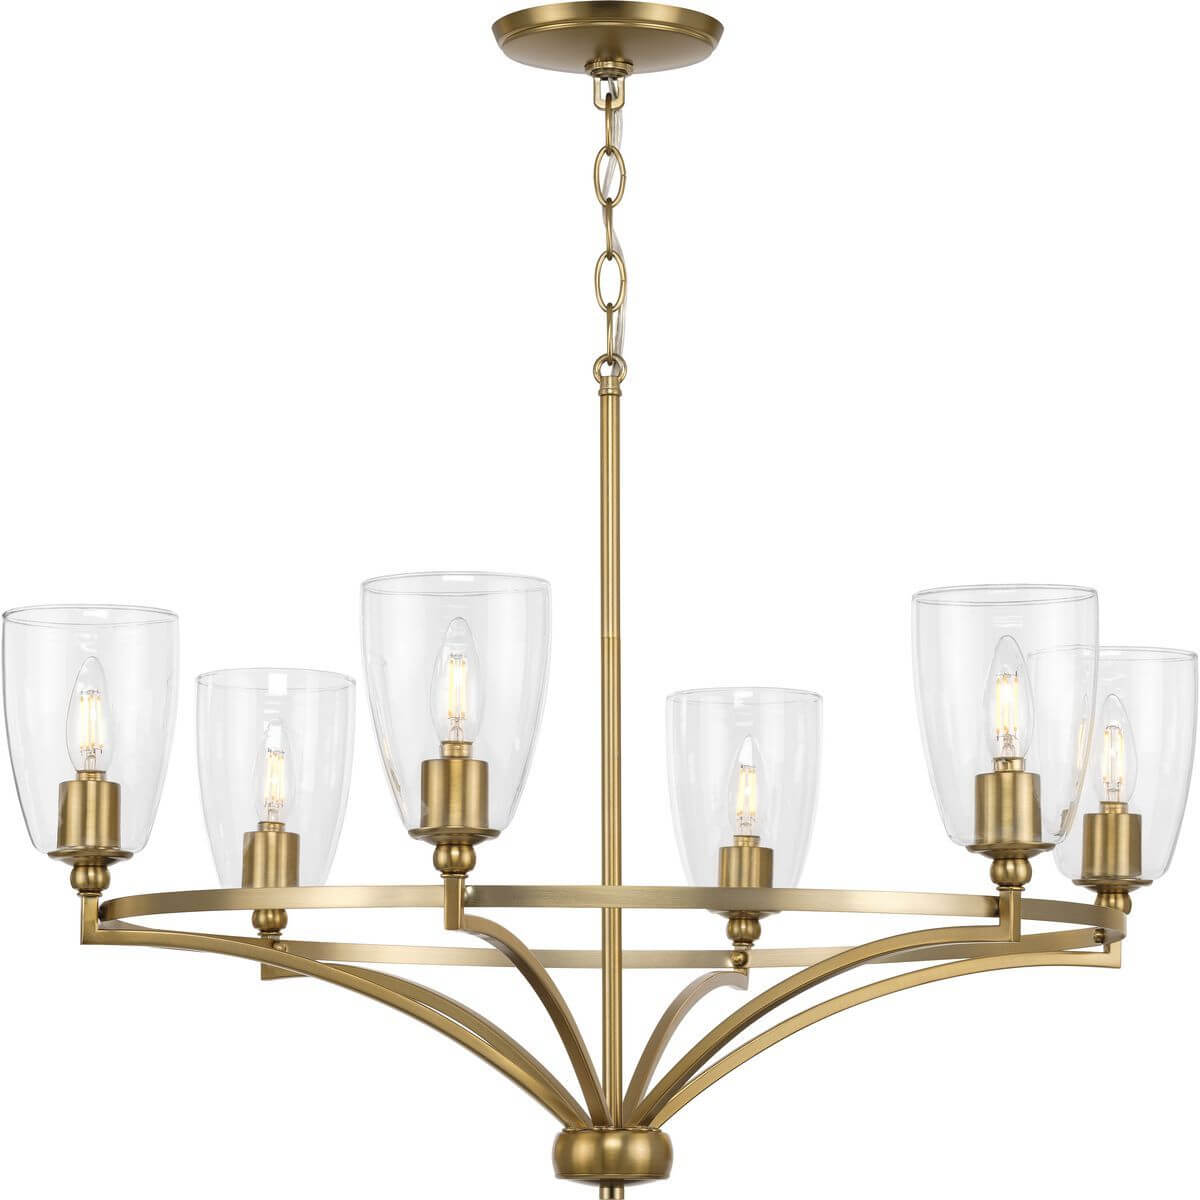 Progress Lighting Parkhurst 6 Light 30 inch Chandelier in Brushed Bronze with Clear Glass P400297-109